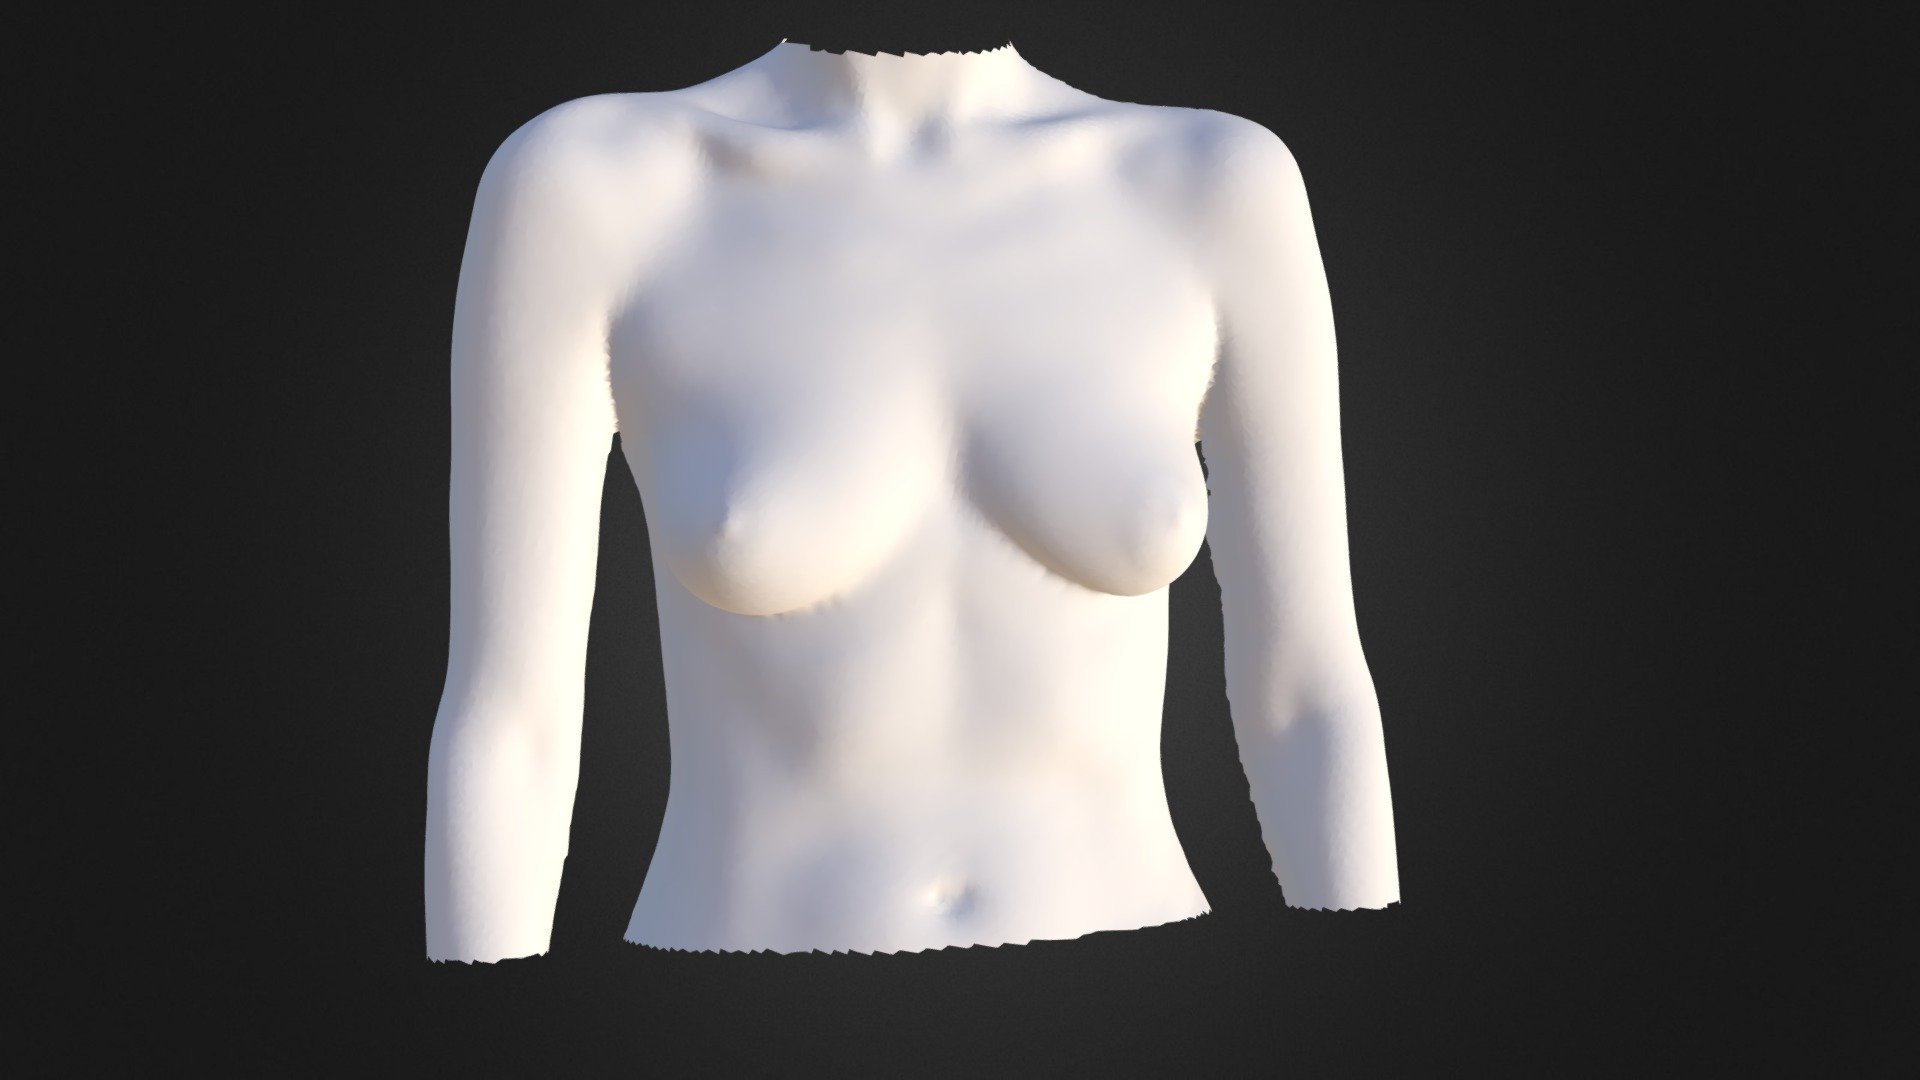 3D Scanned Breasts - Artec 3D